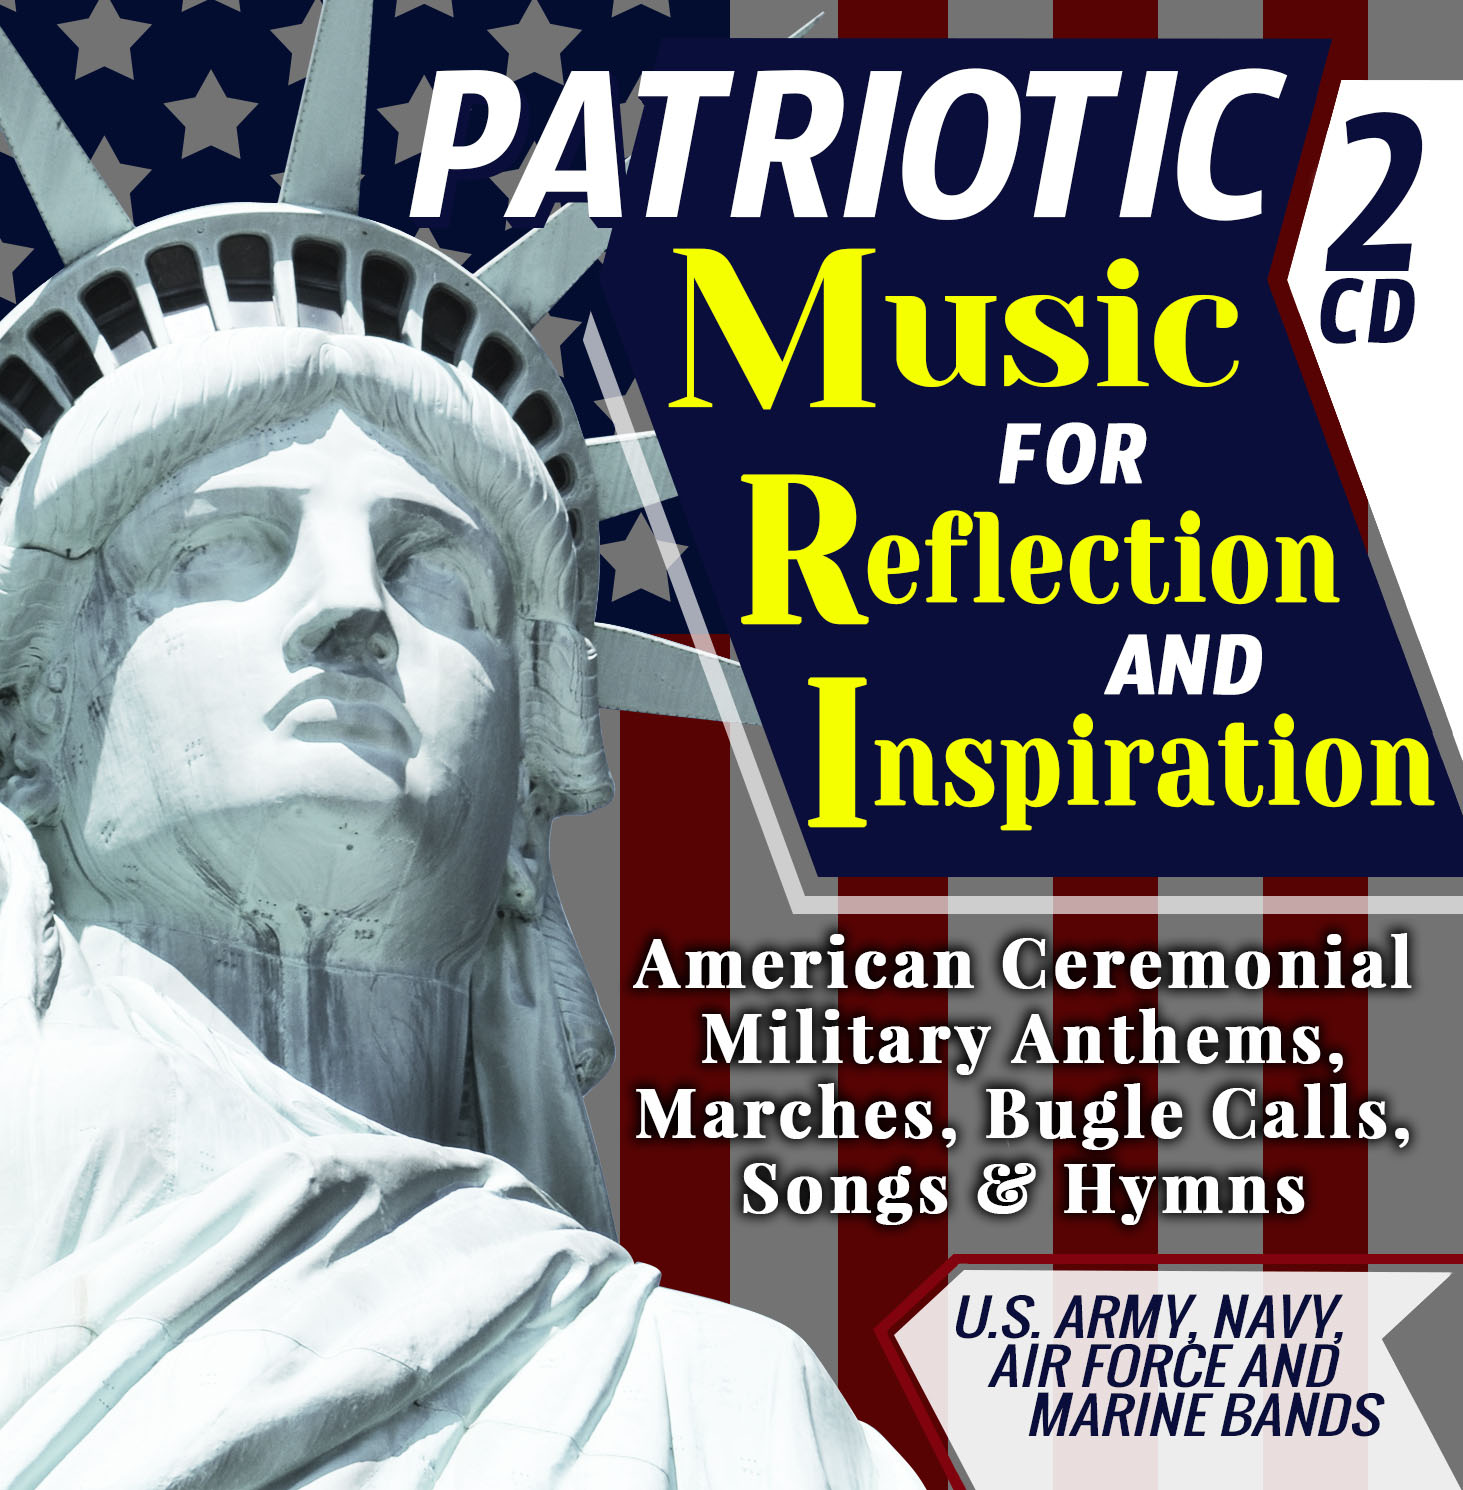 Patriotic Music for Reflection & Inspiration